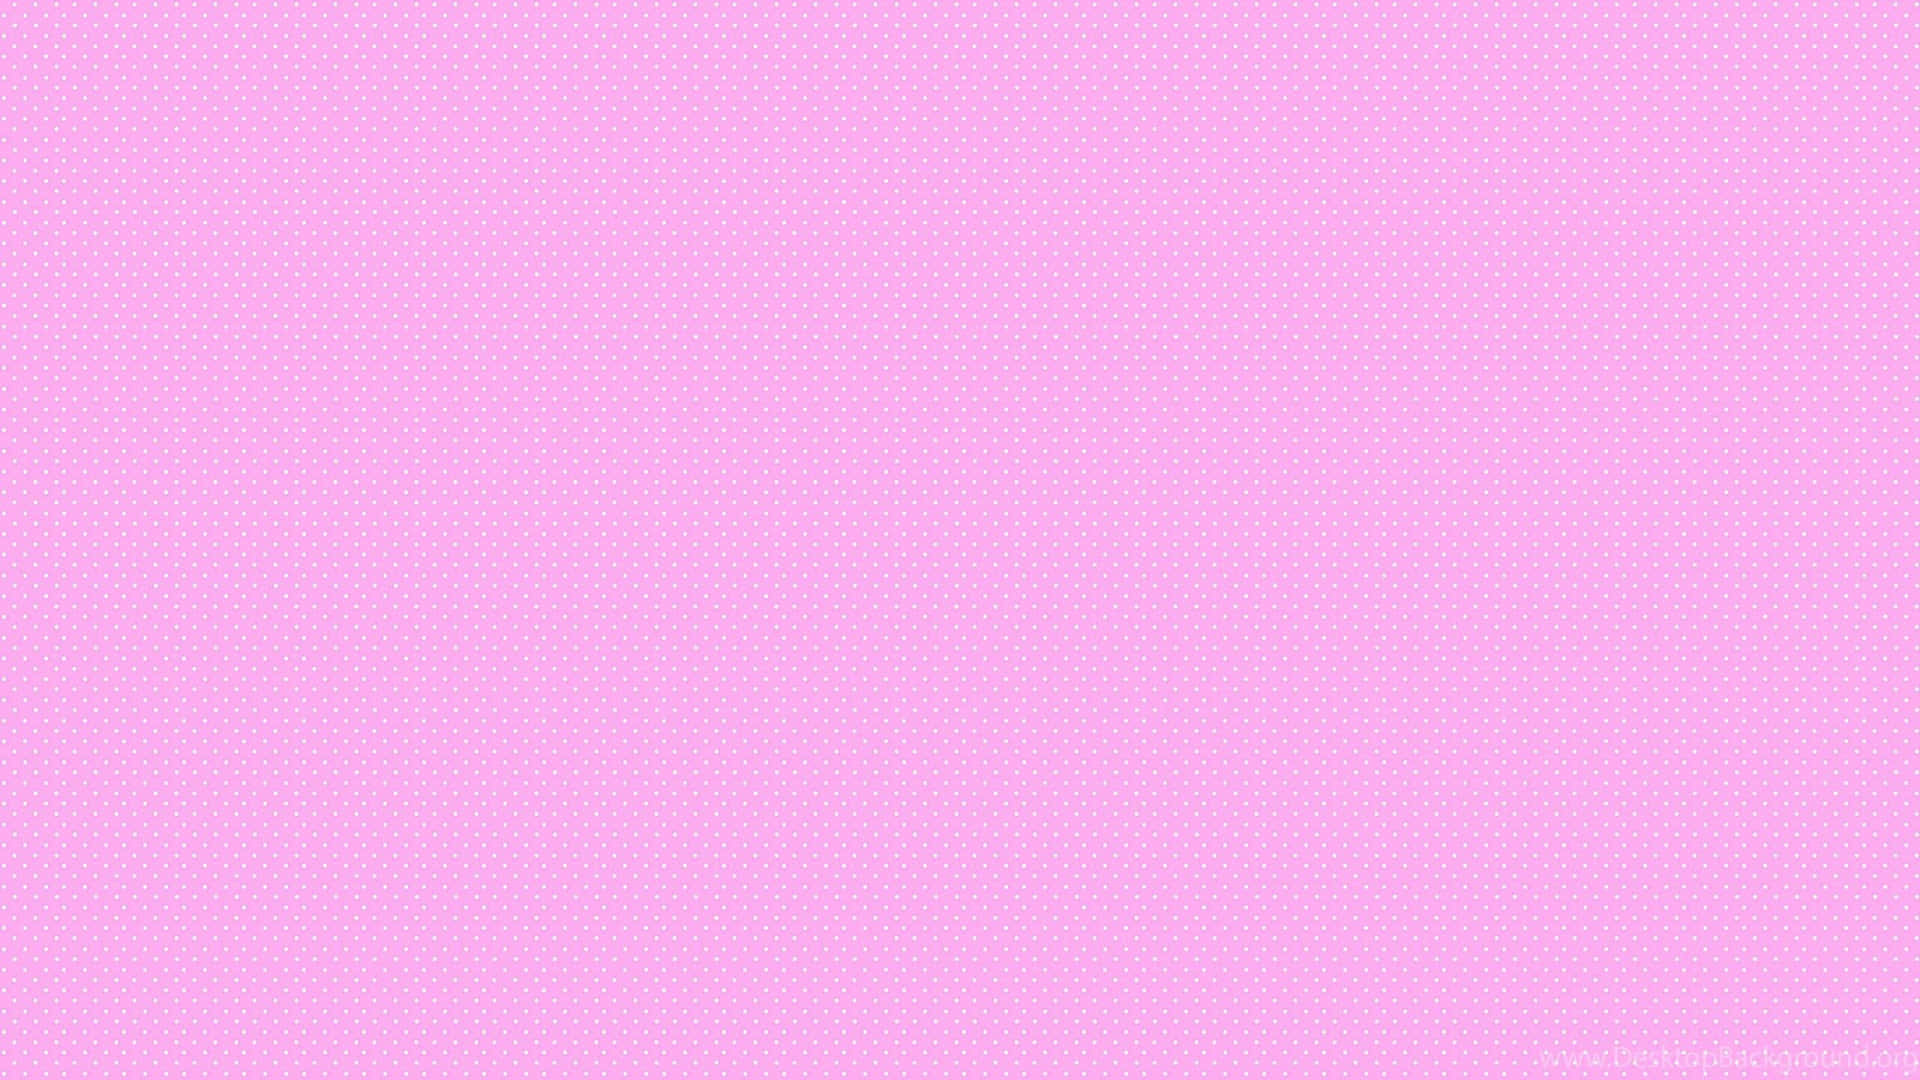 Premium Photo  A pink and purple background with a pink background that  sayspink 